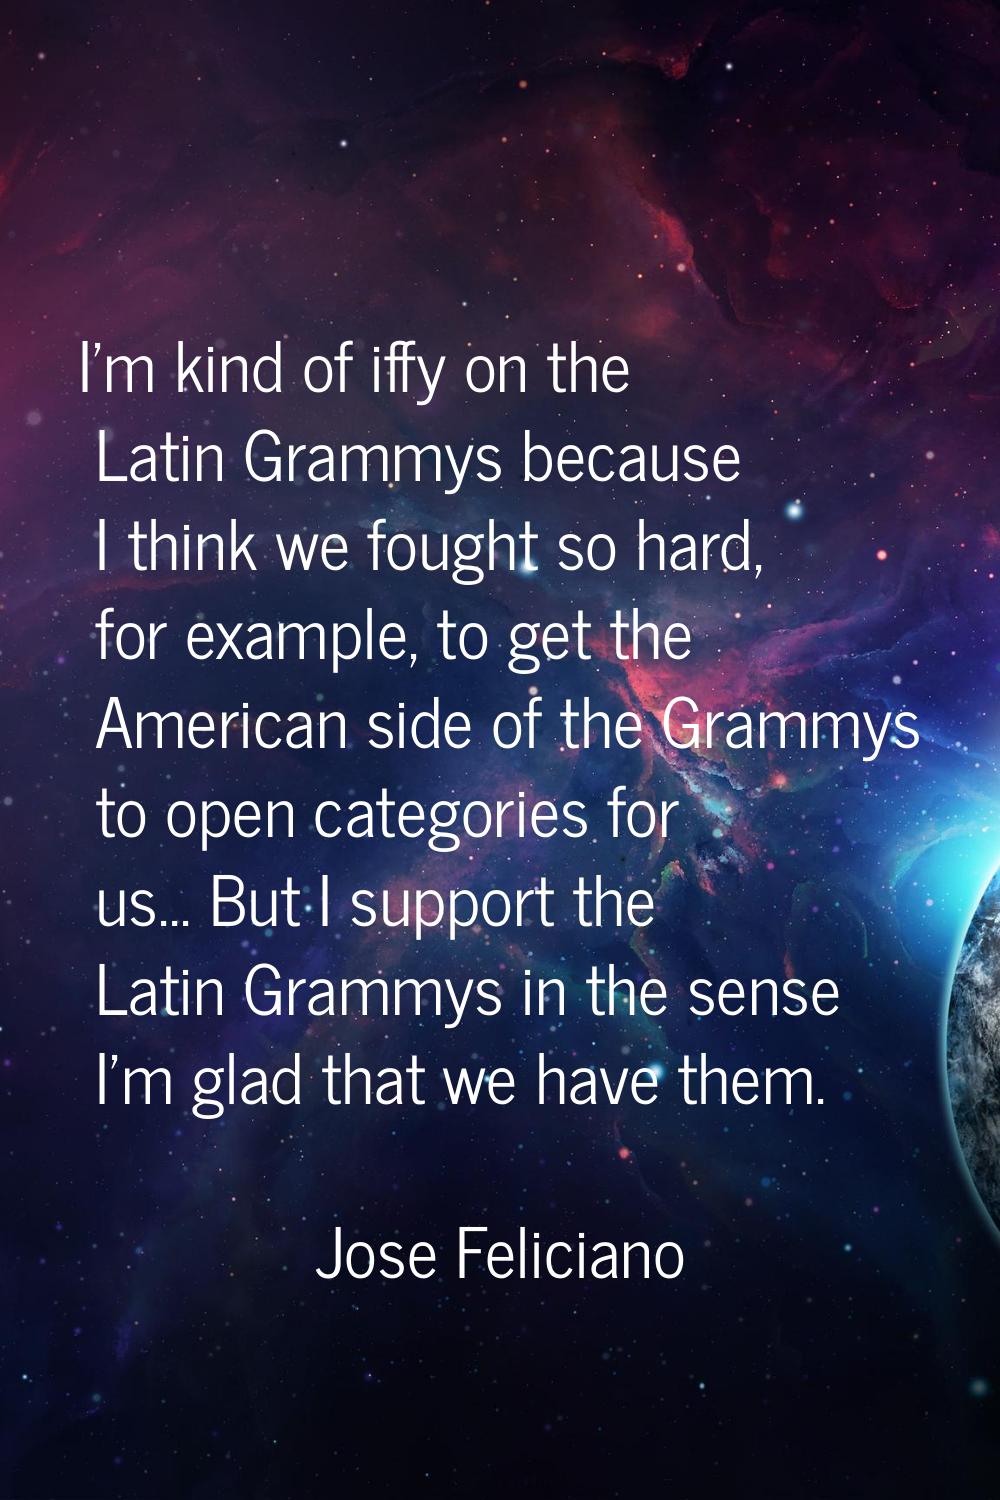 I'm kind of iffy on the Latin Grammys because I think we fought so hard, for example, to get the Am